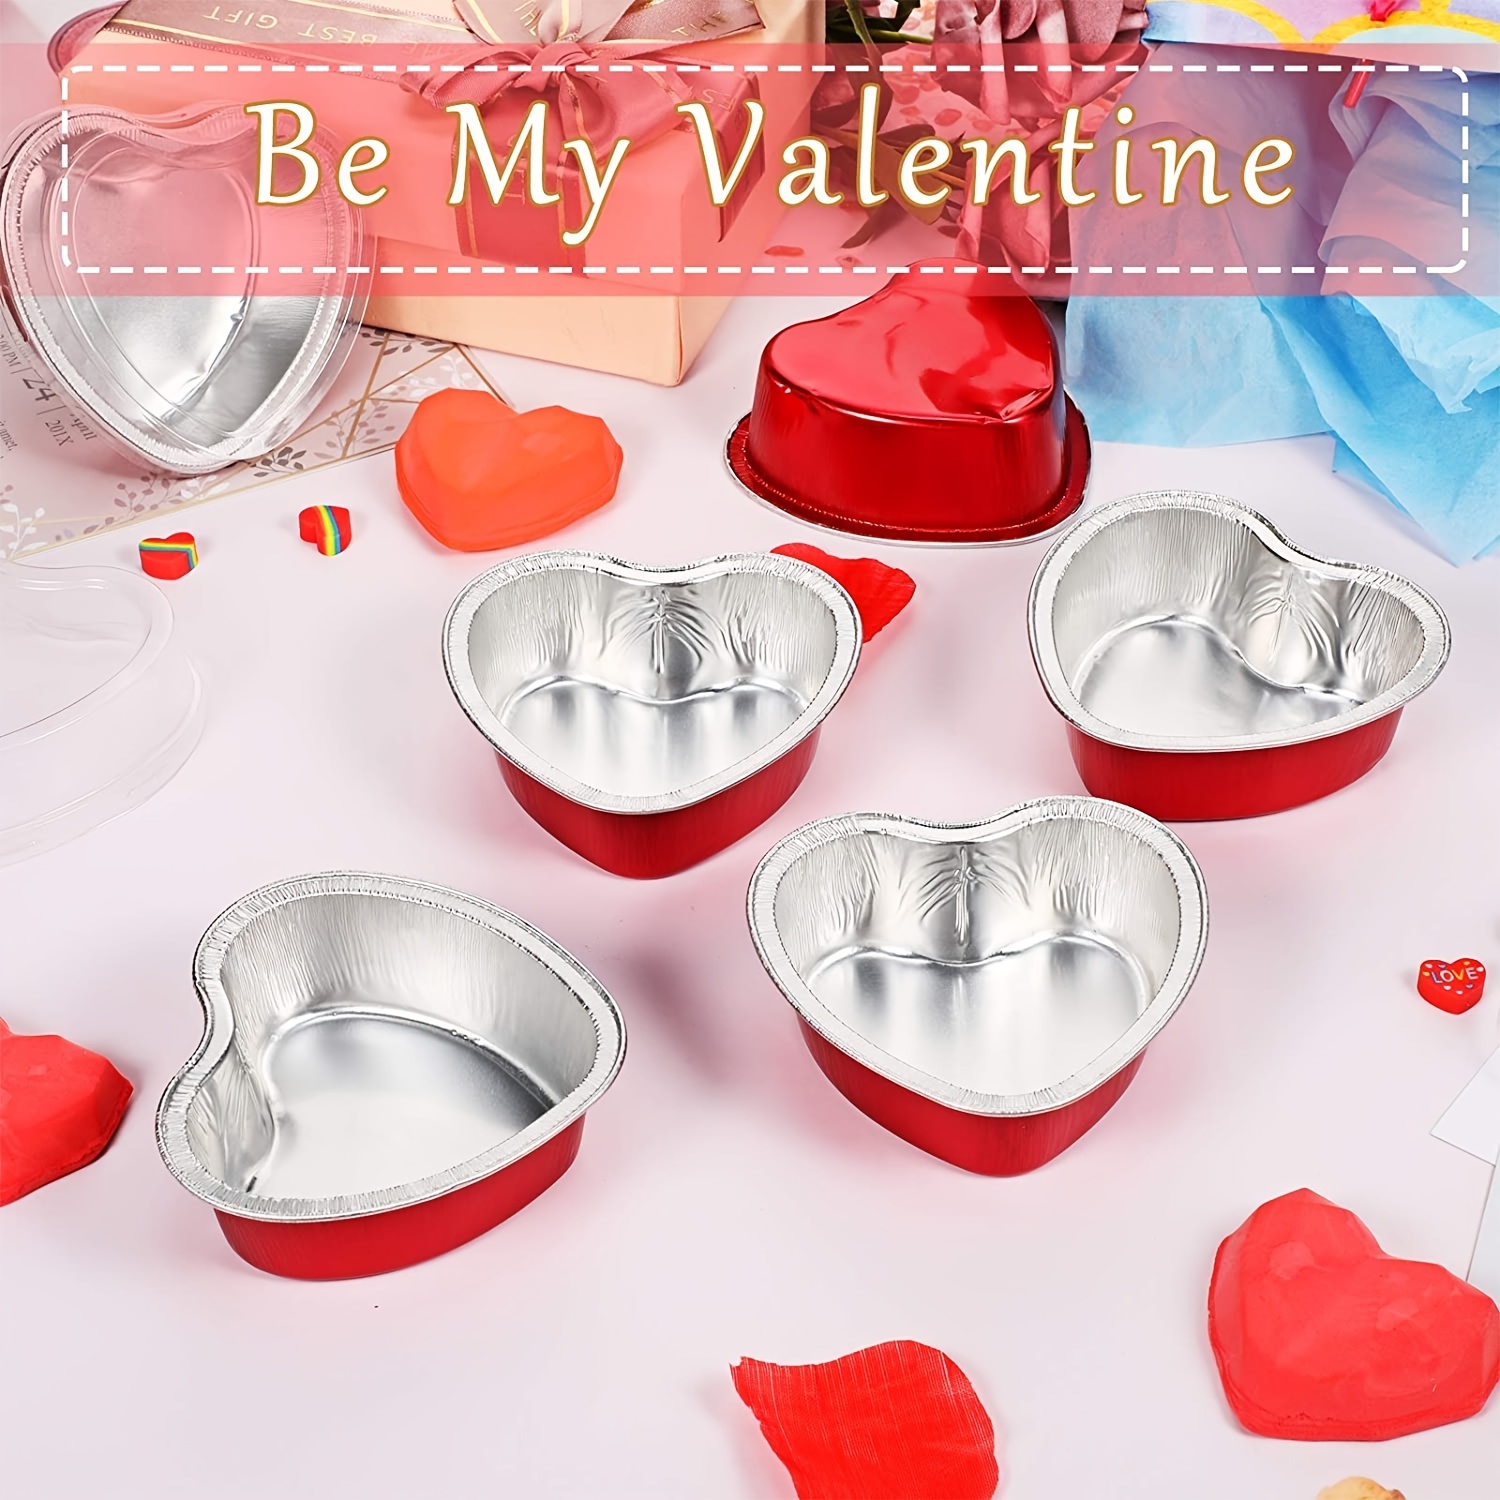 10pcs Heart-shaped Cake Pan With Lid For Baking Cake Cup Disposable Mini  Aluminum Foil Pan